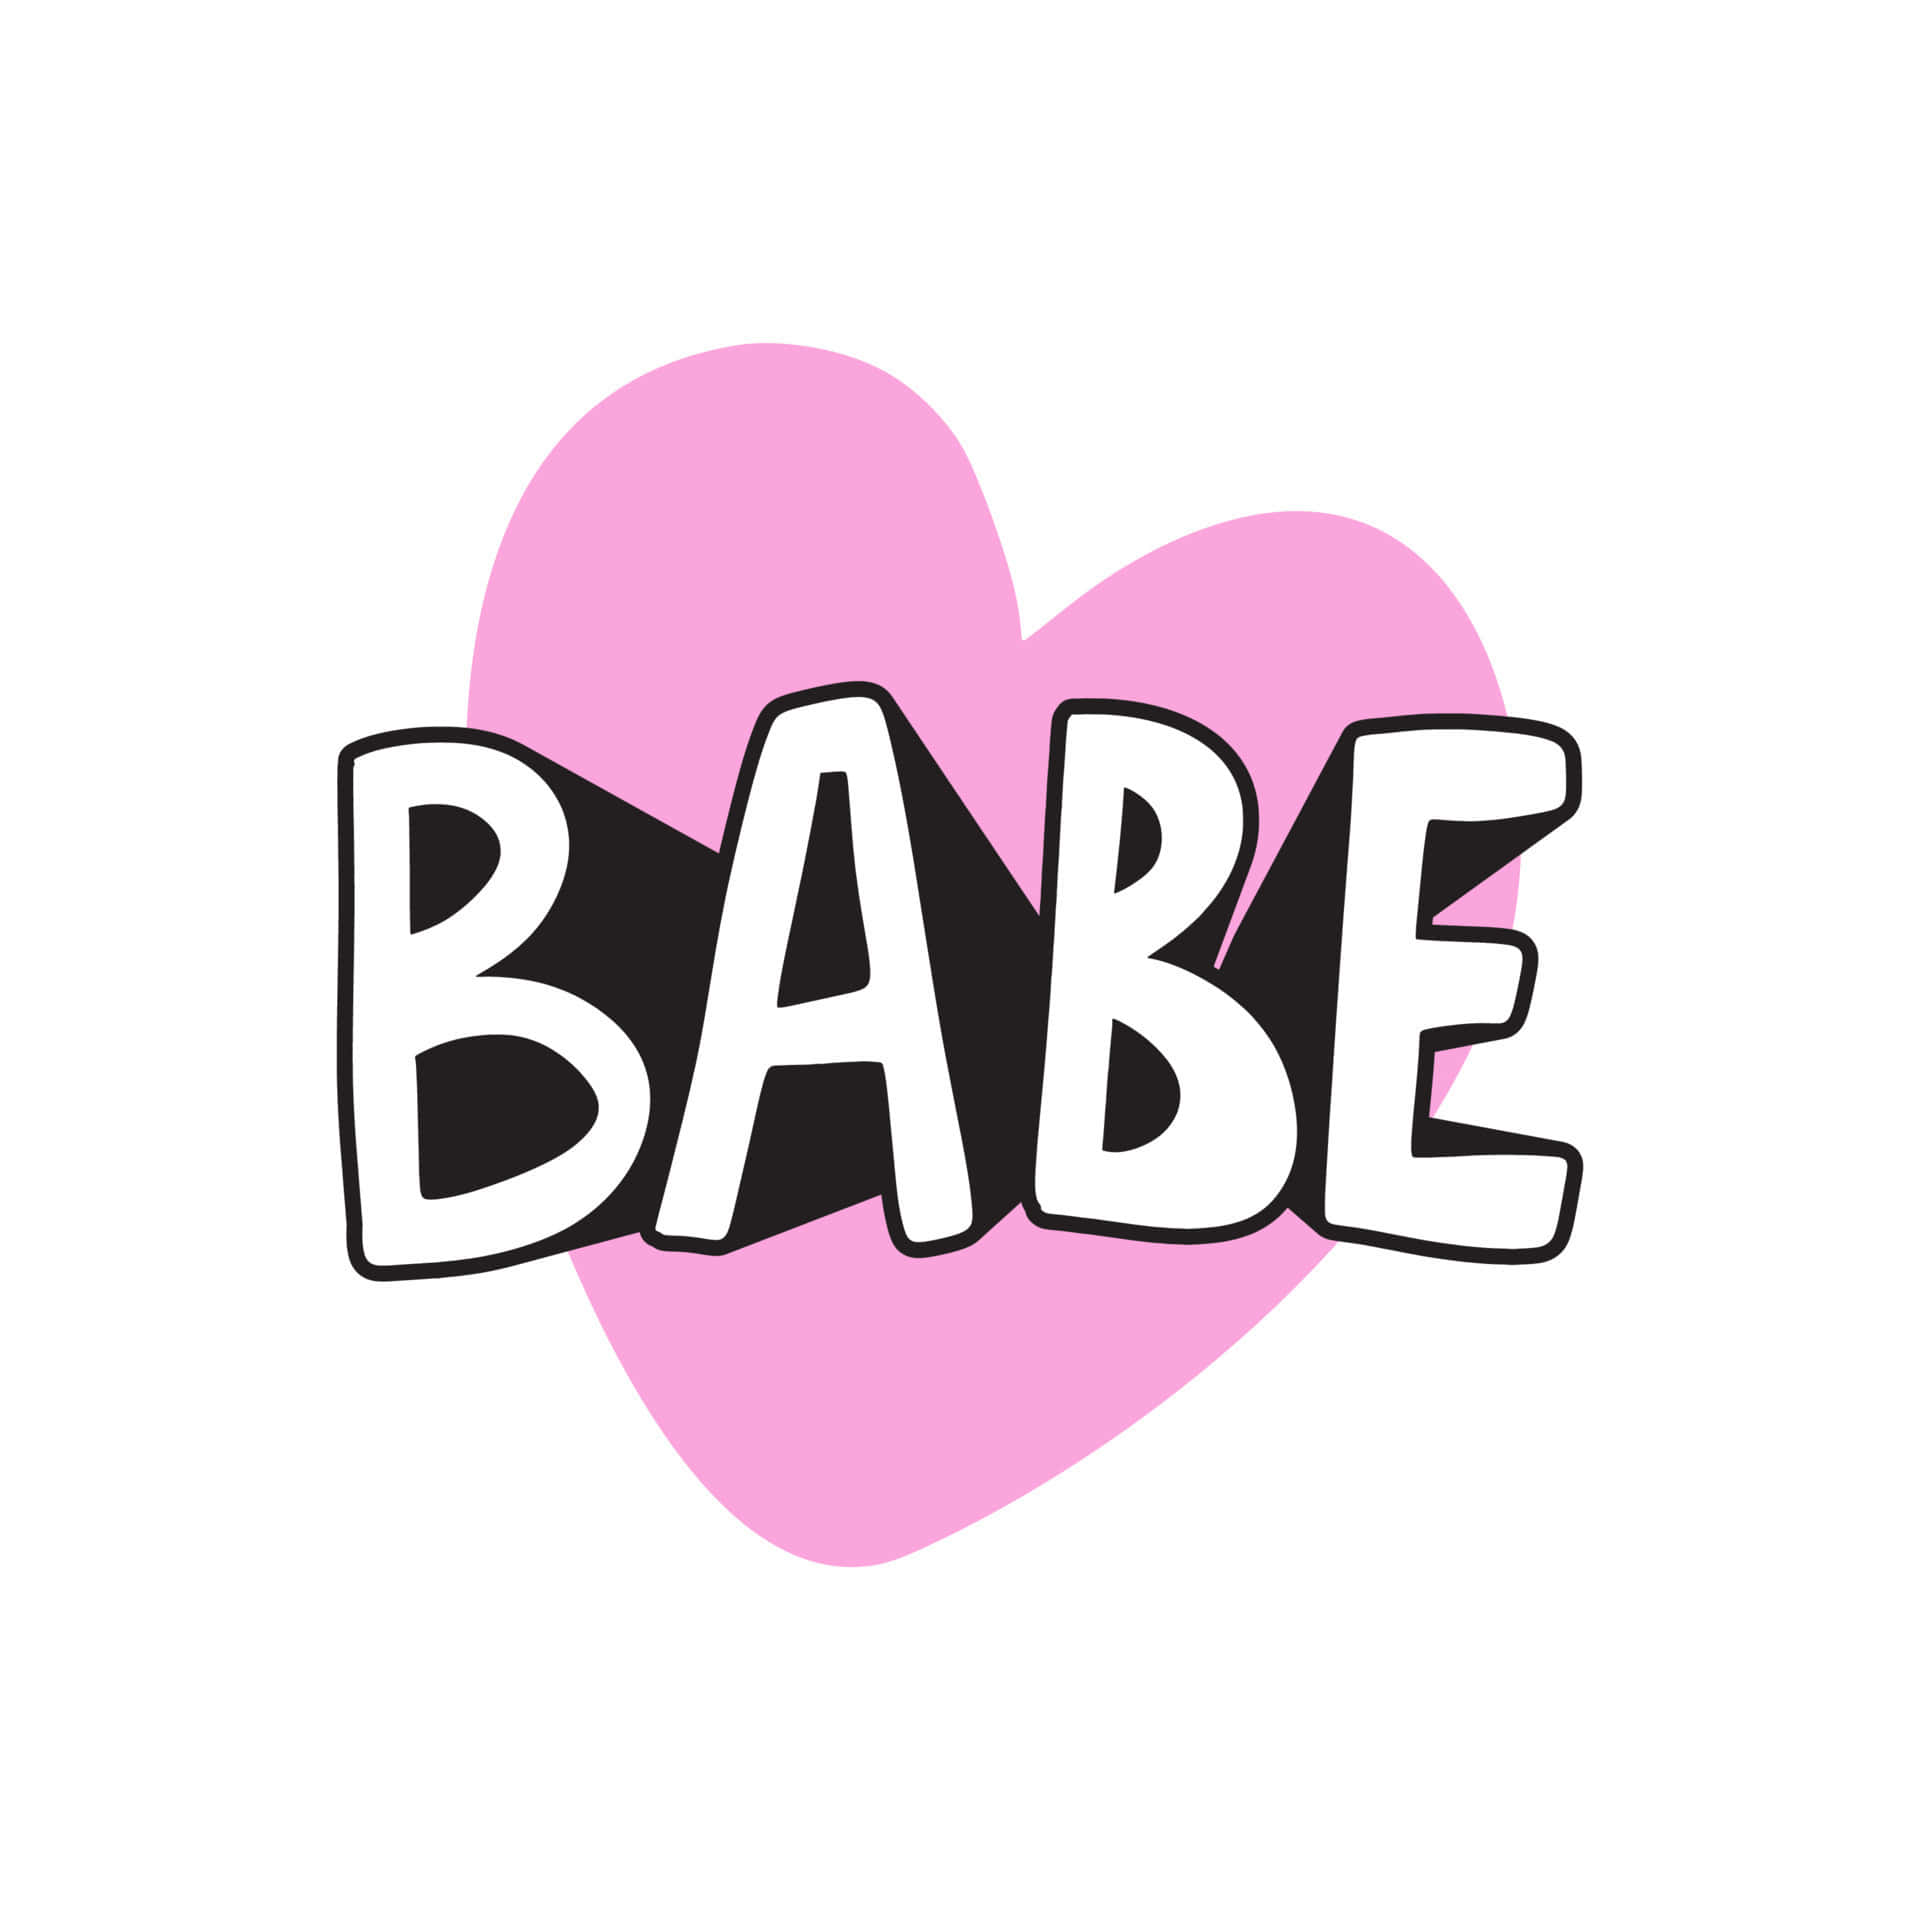 Babe Heart Graphic